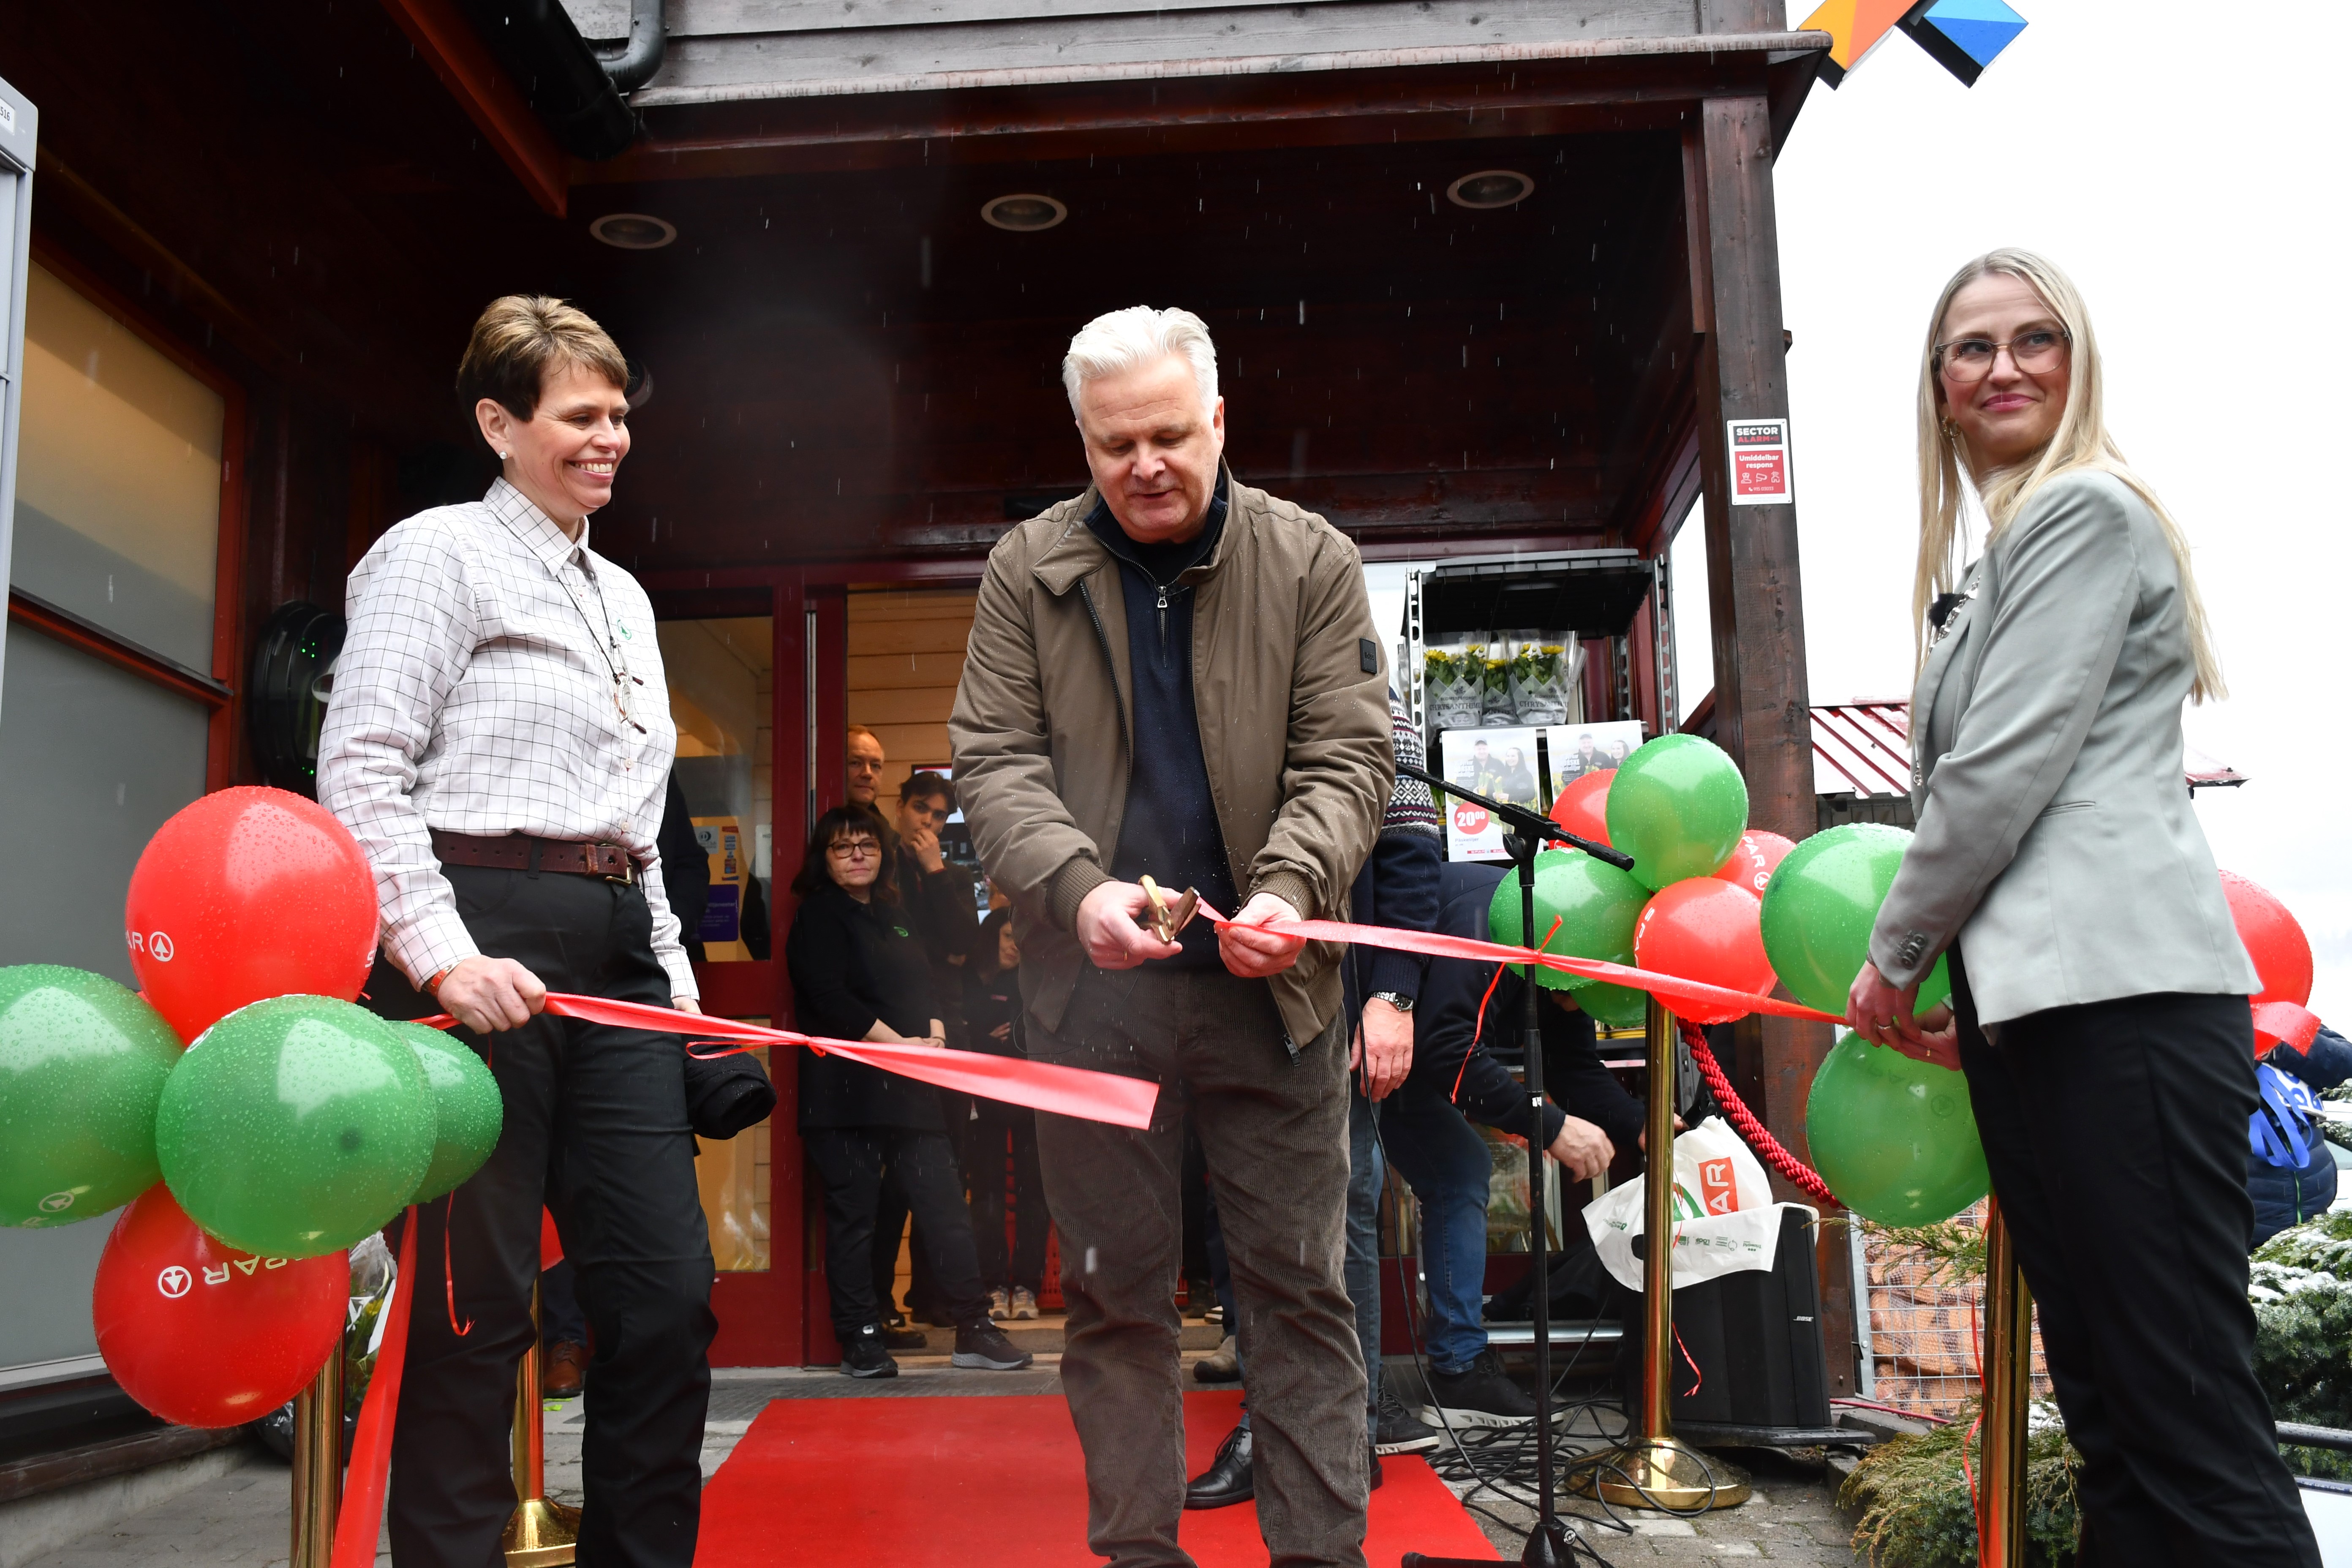 Full community celebration as the world's first high-tech SPAR opens   